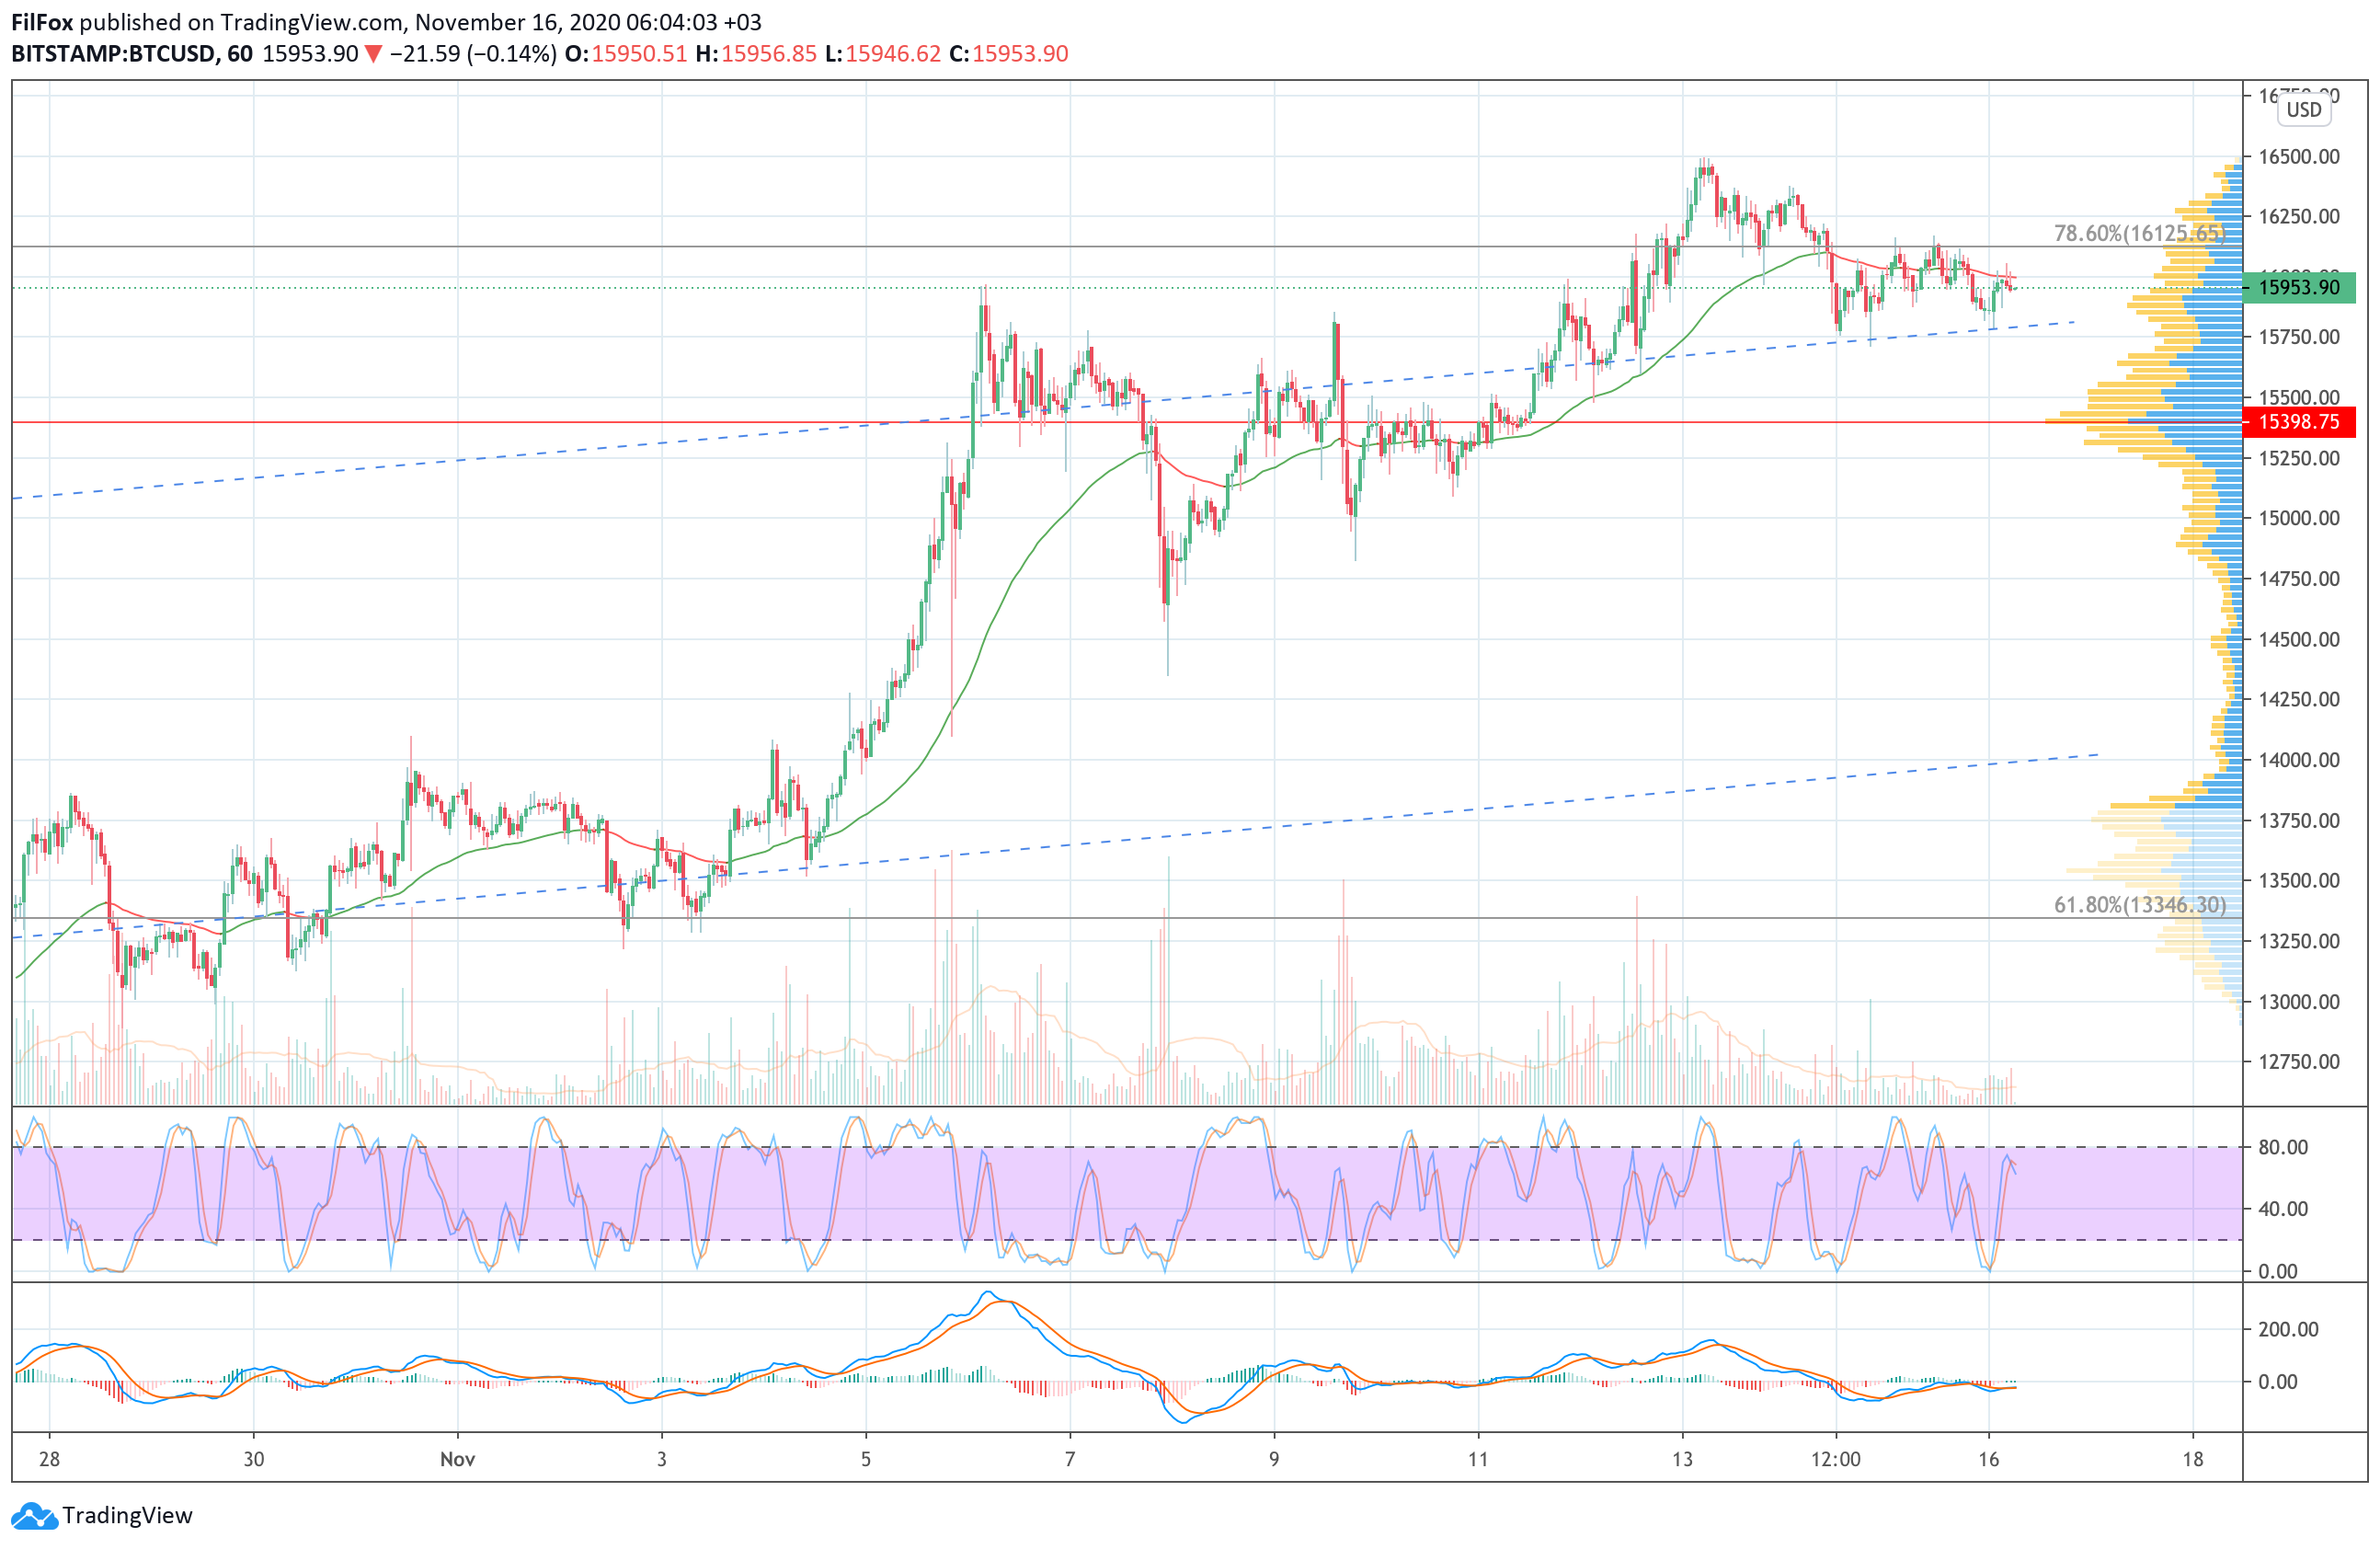 Analysis of the prices of Bitcoin, Ethereum, Ripple for 11/16/2020